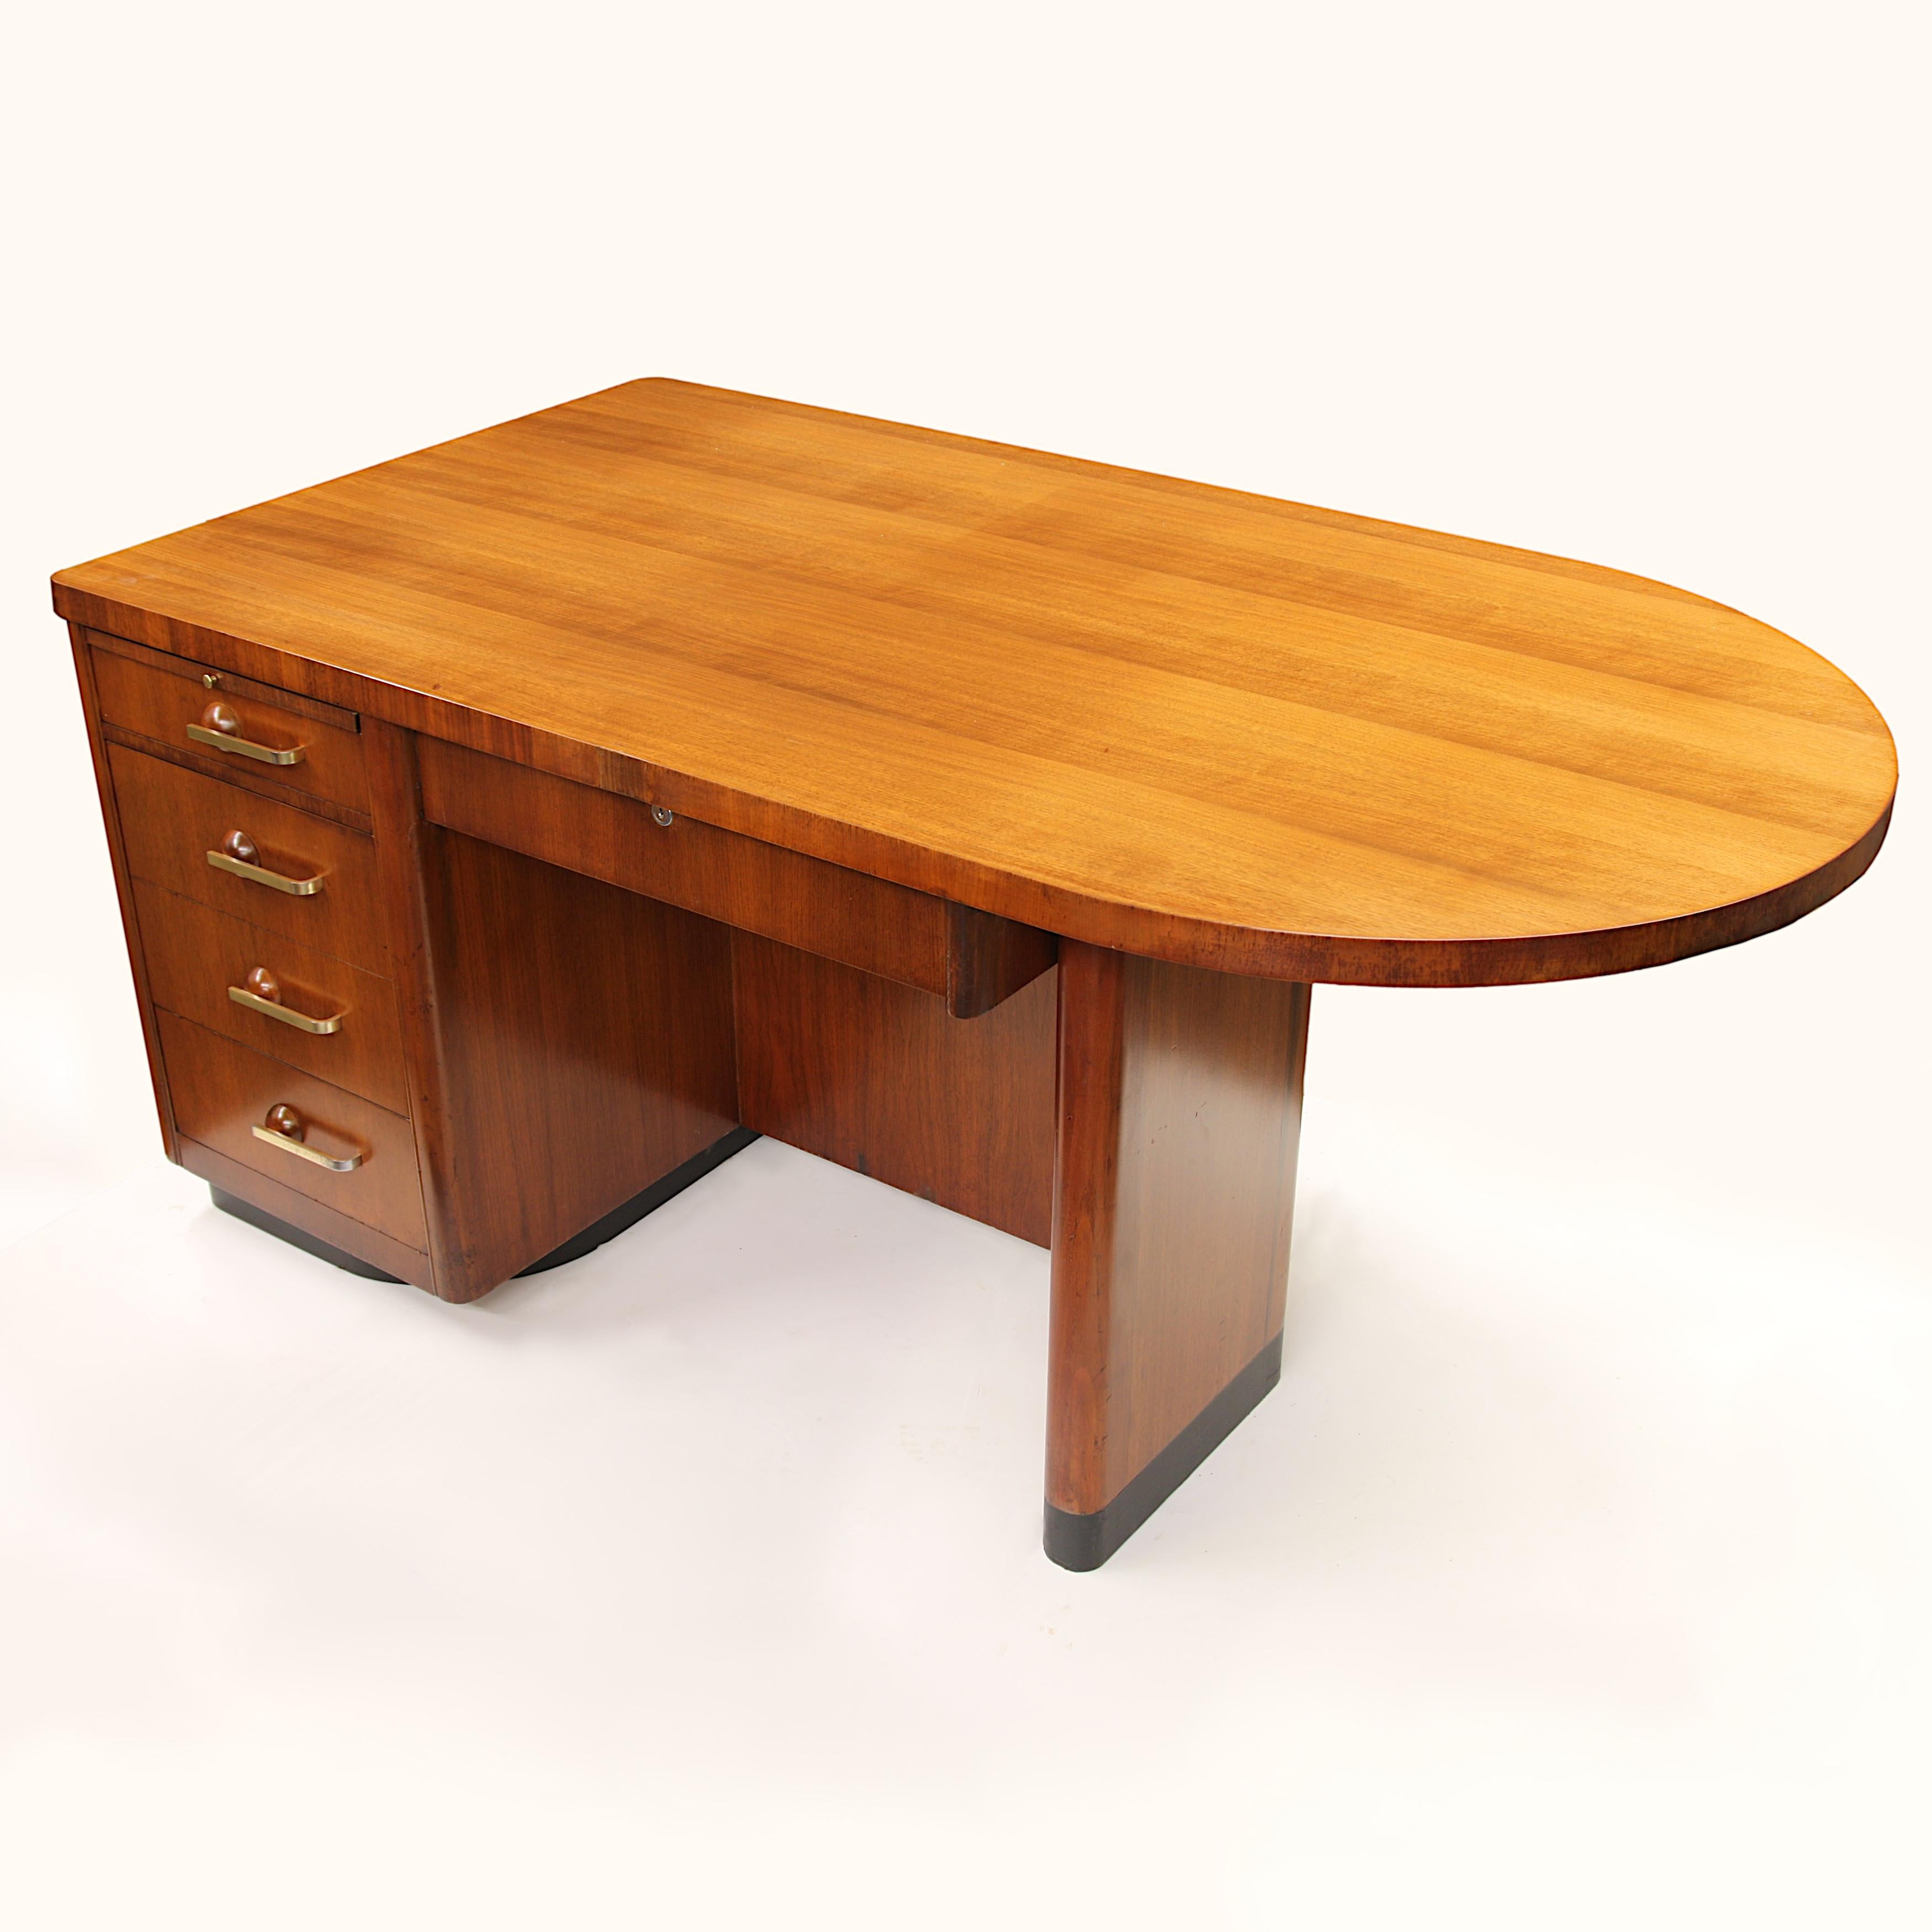 Stunning 1950s desk by the Shelbyville Desk Company of Indiana. Desk features a 66